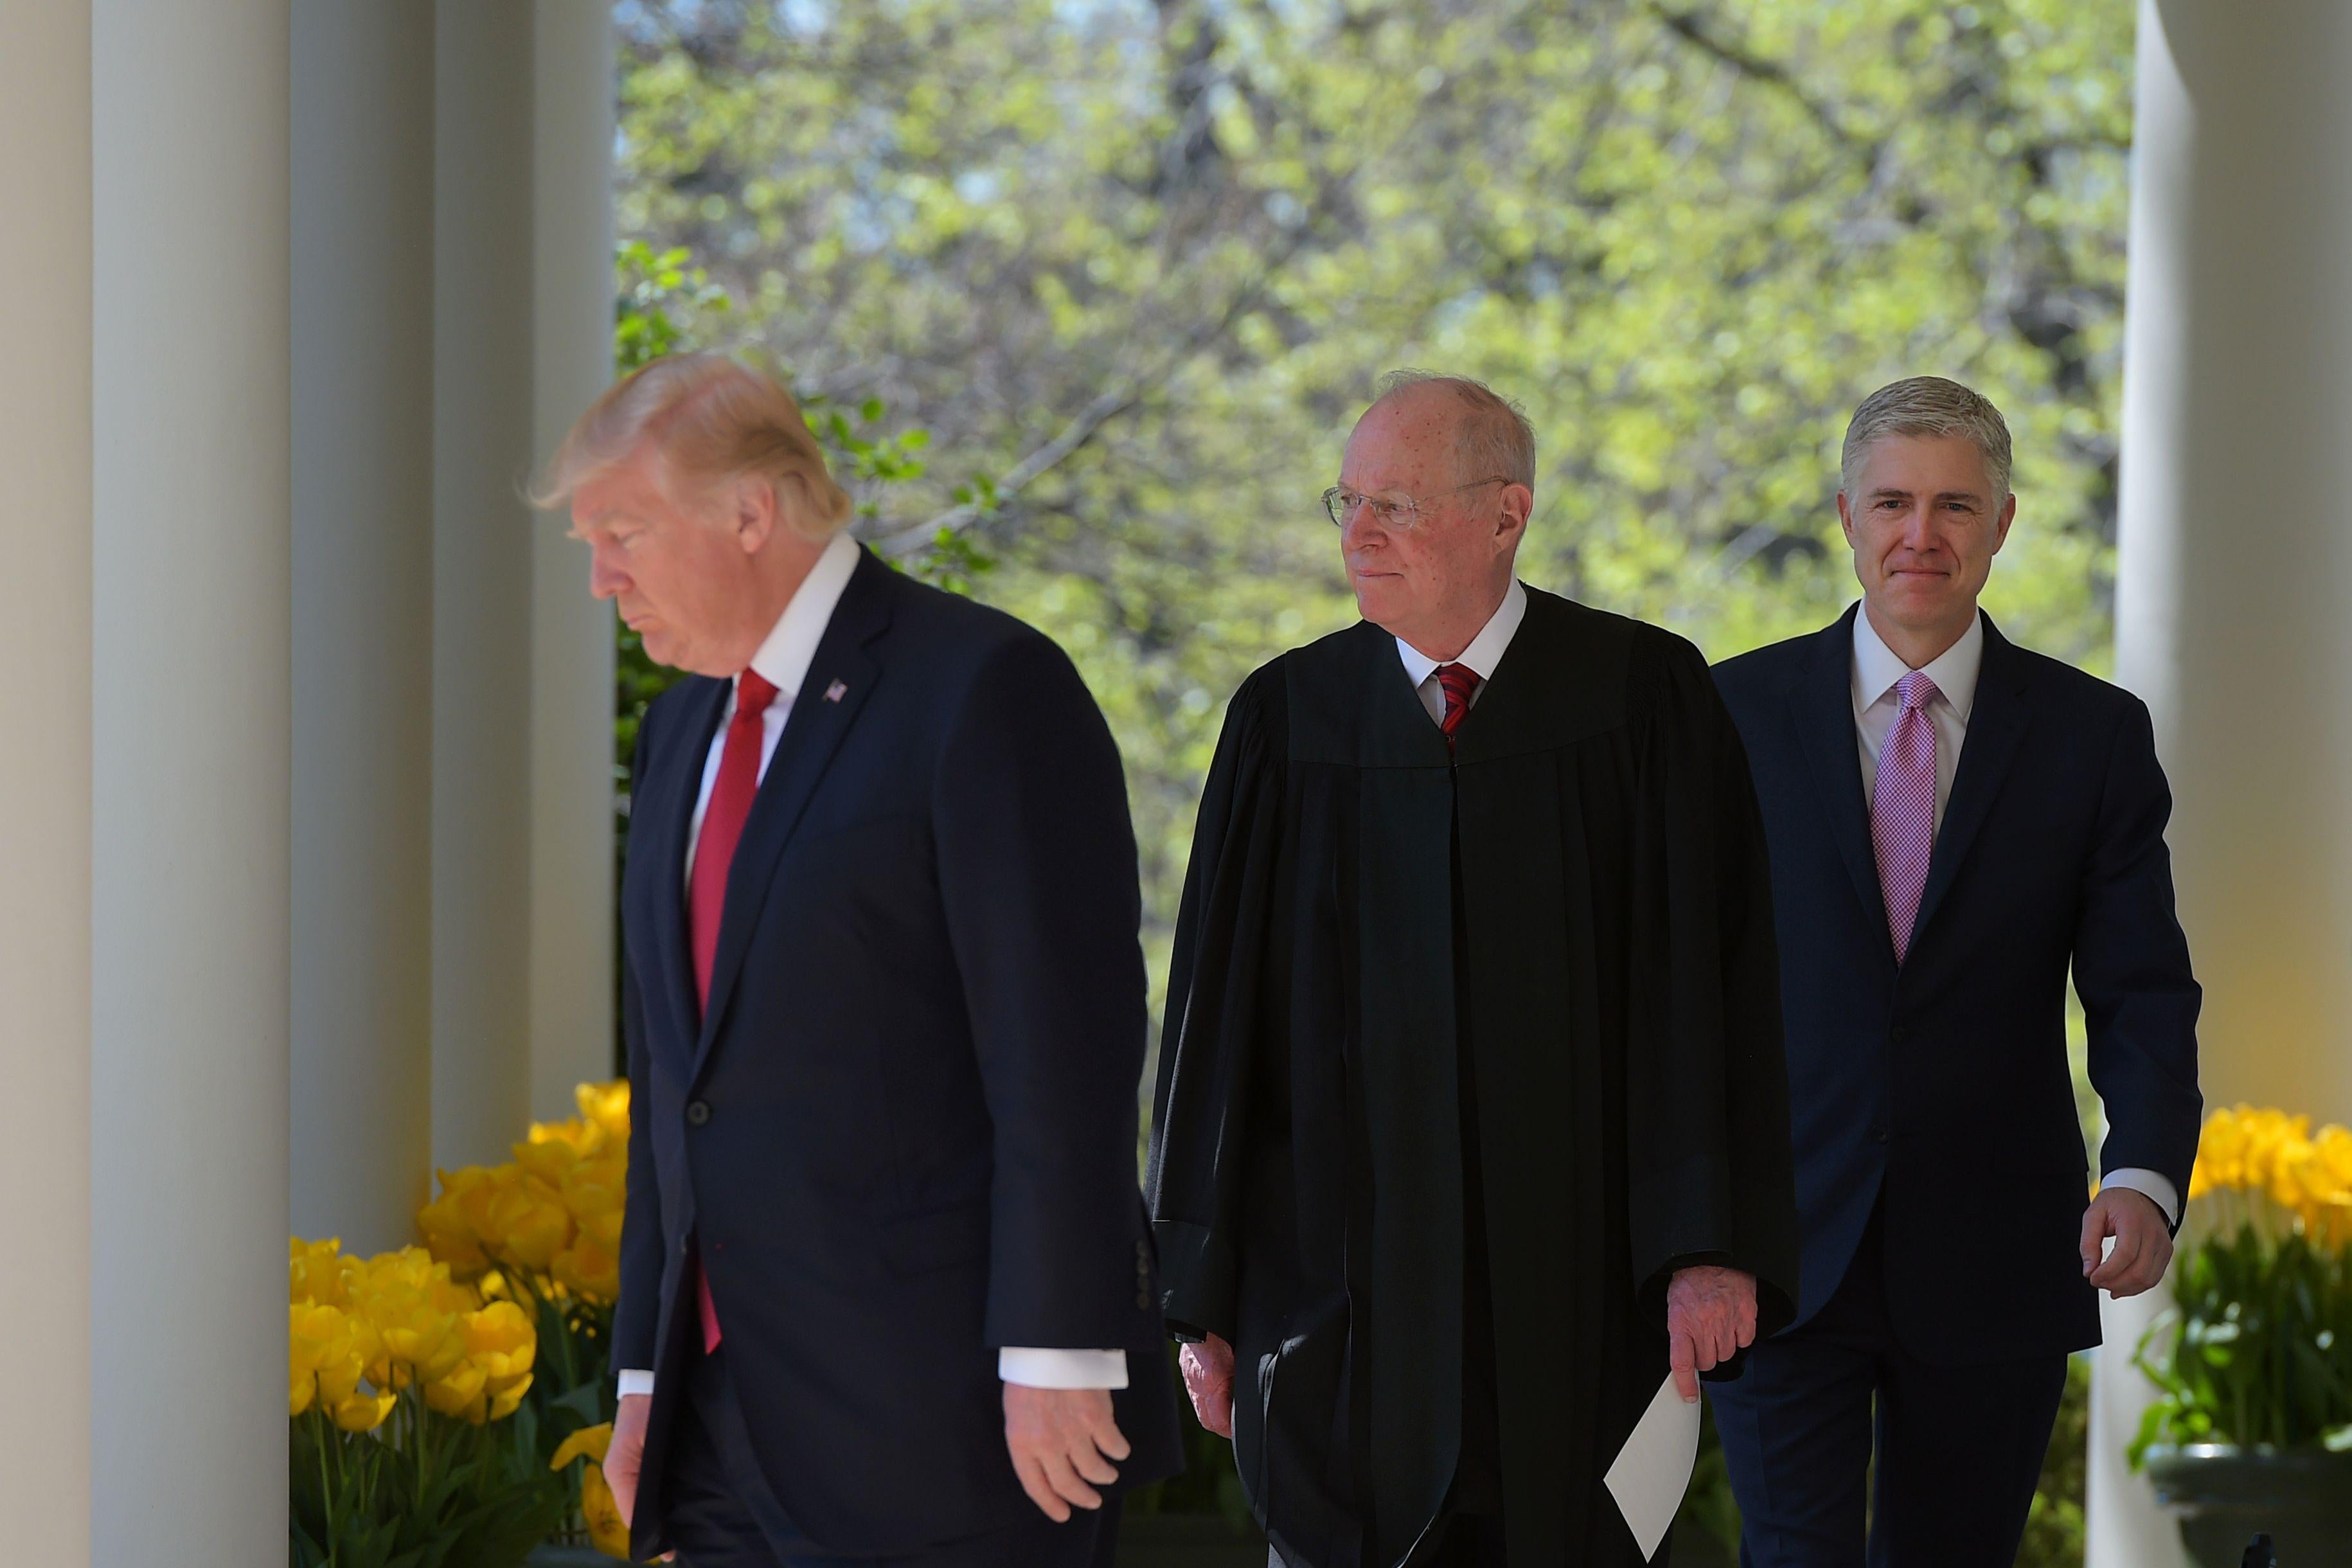 President Donald Trump, Justice Anthony Kennedy and Neil Gorsuch make their way to the Rose Garden of the White House for Gorsuch's swearing-in ceremony  on April 10, 2017.